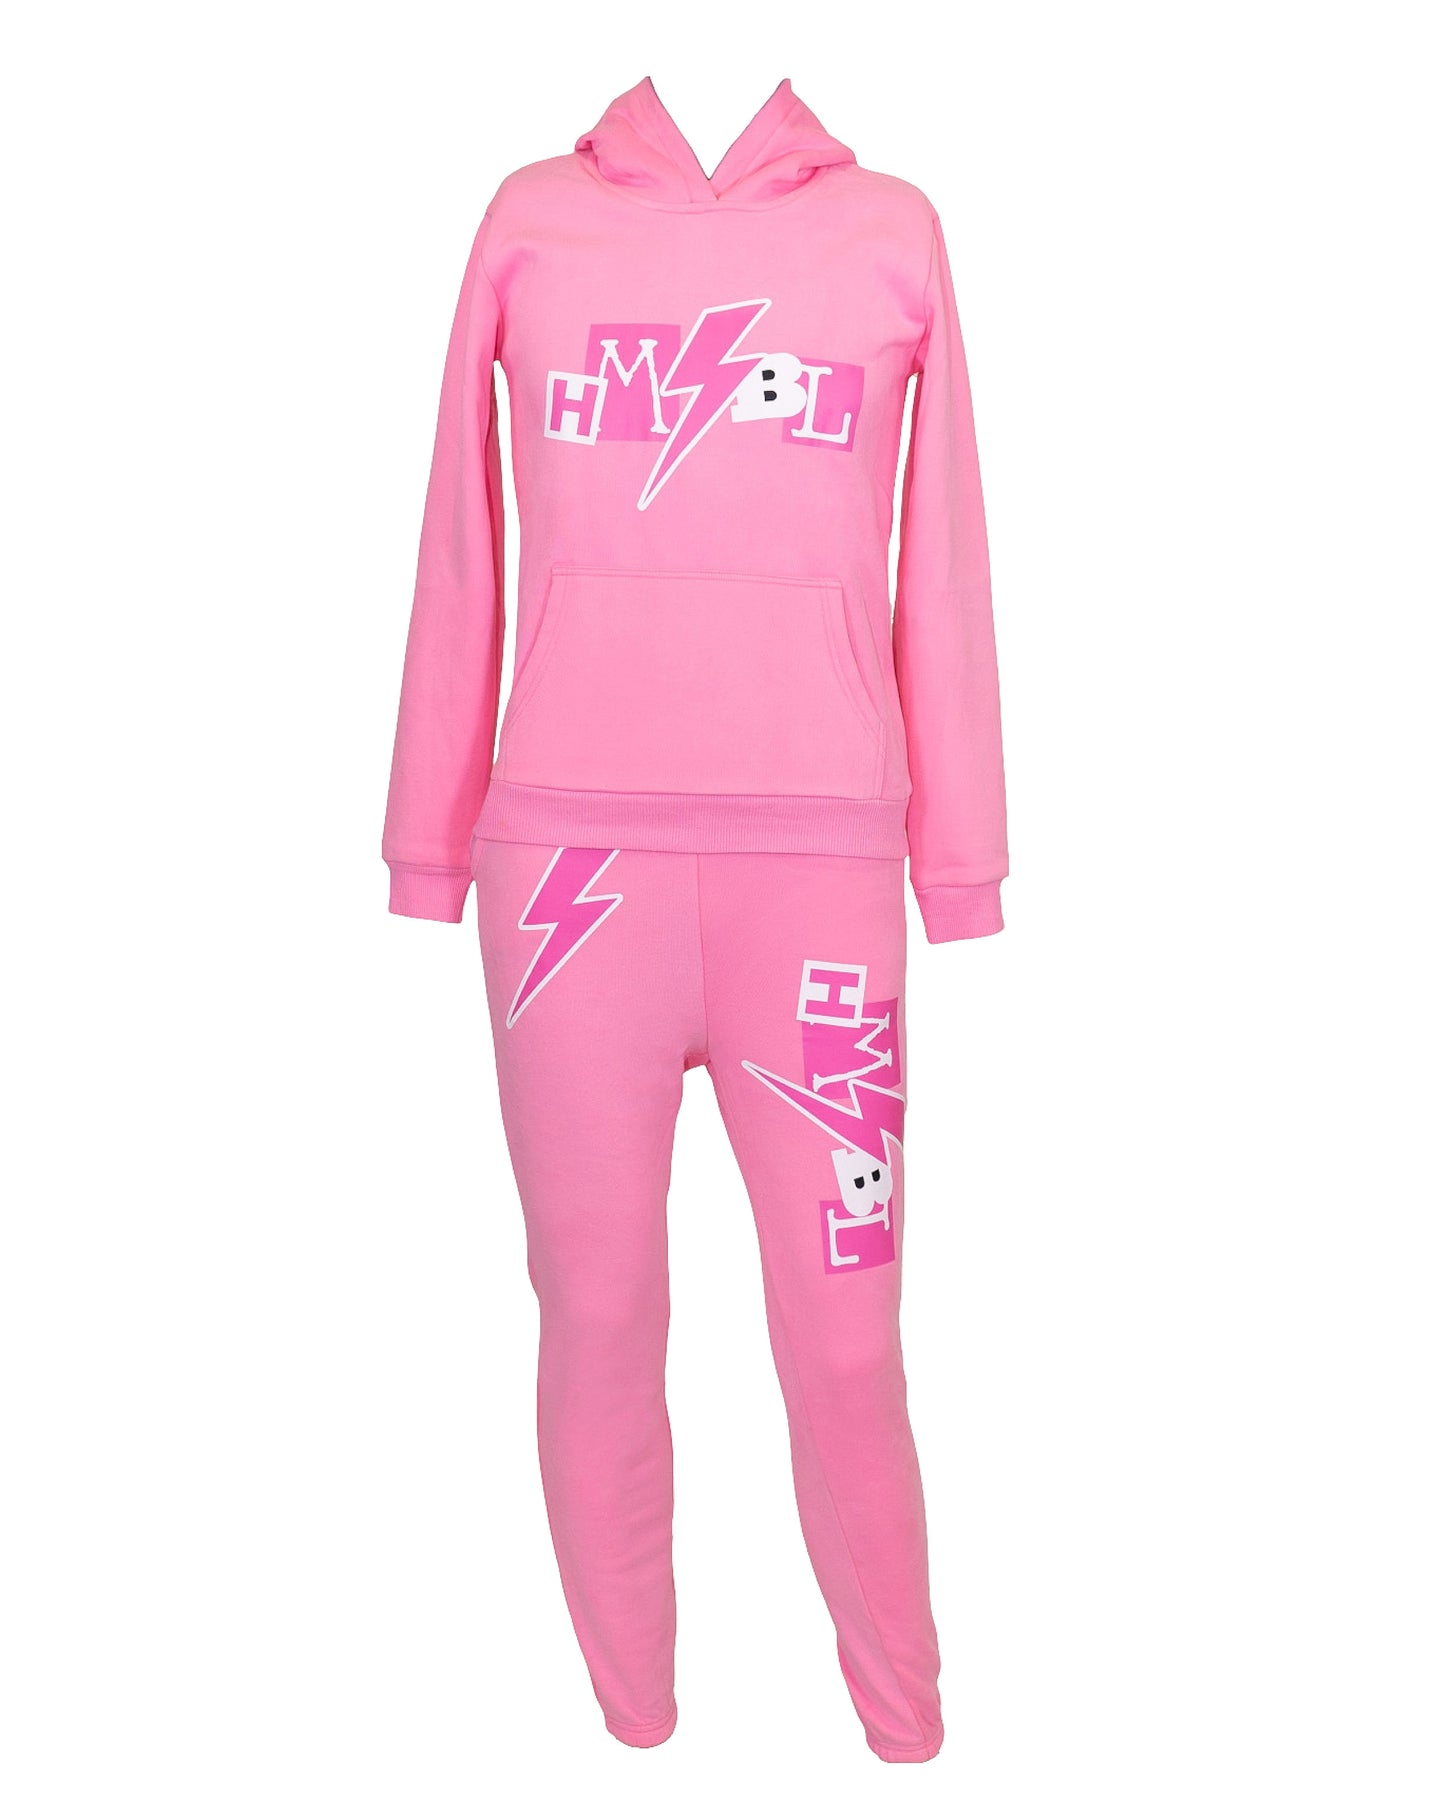 Cool Pink Adult Sweatsuit